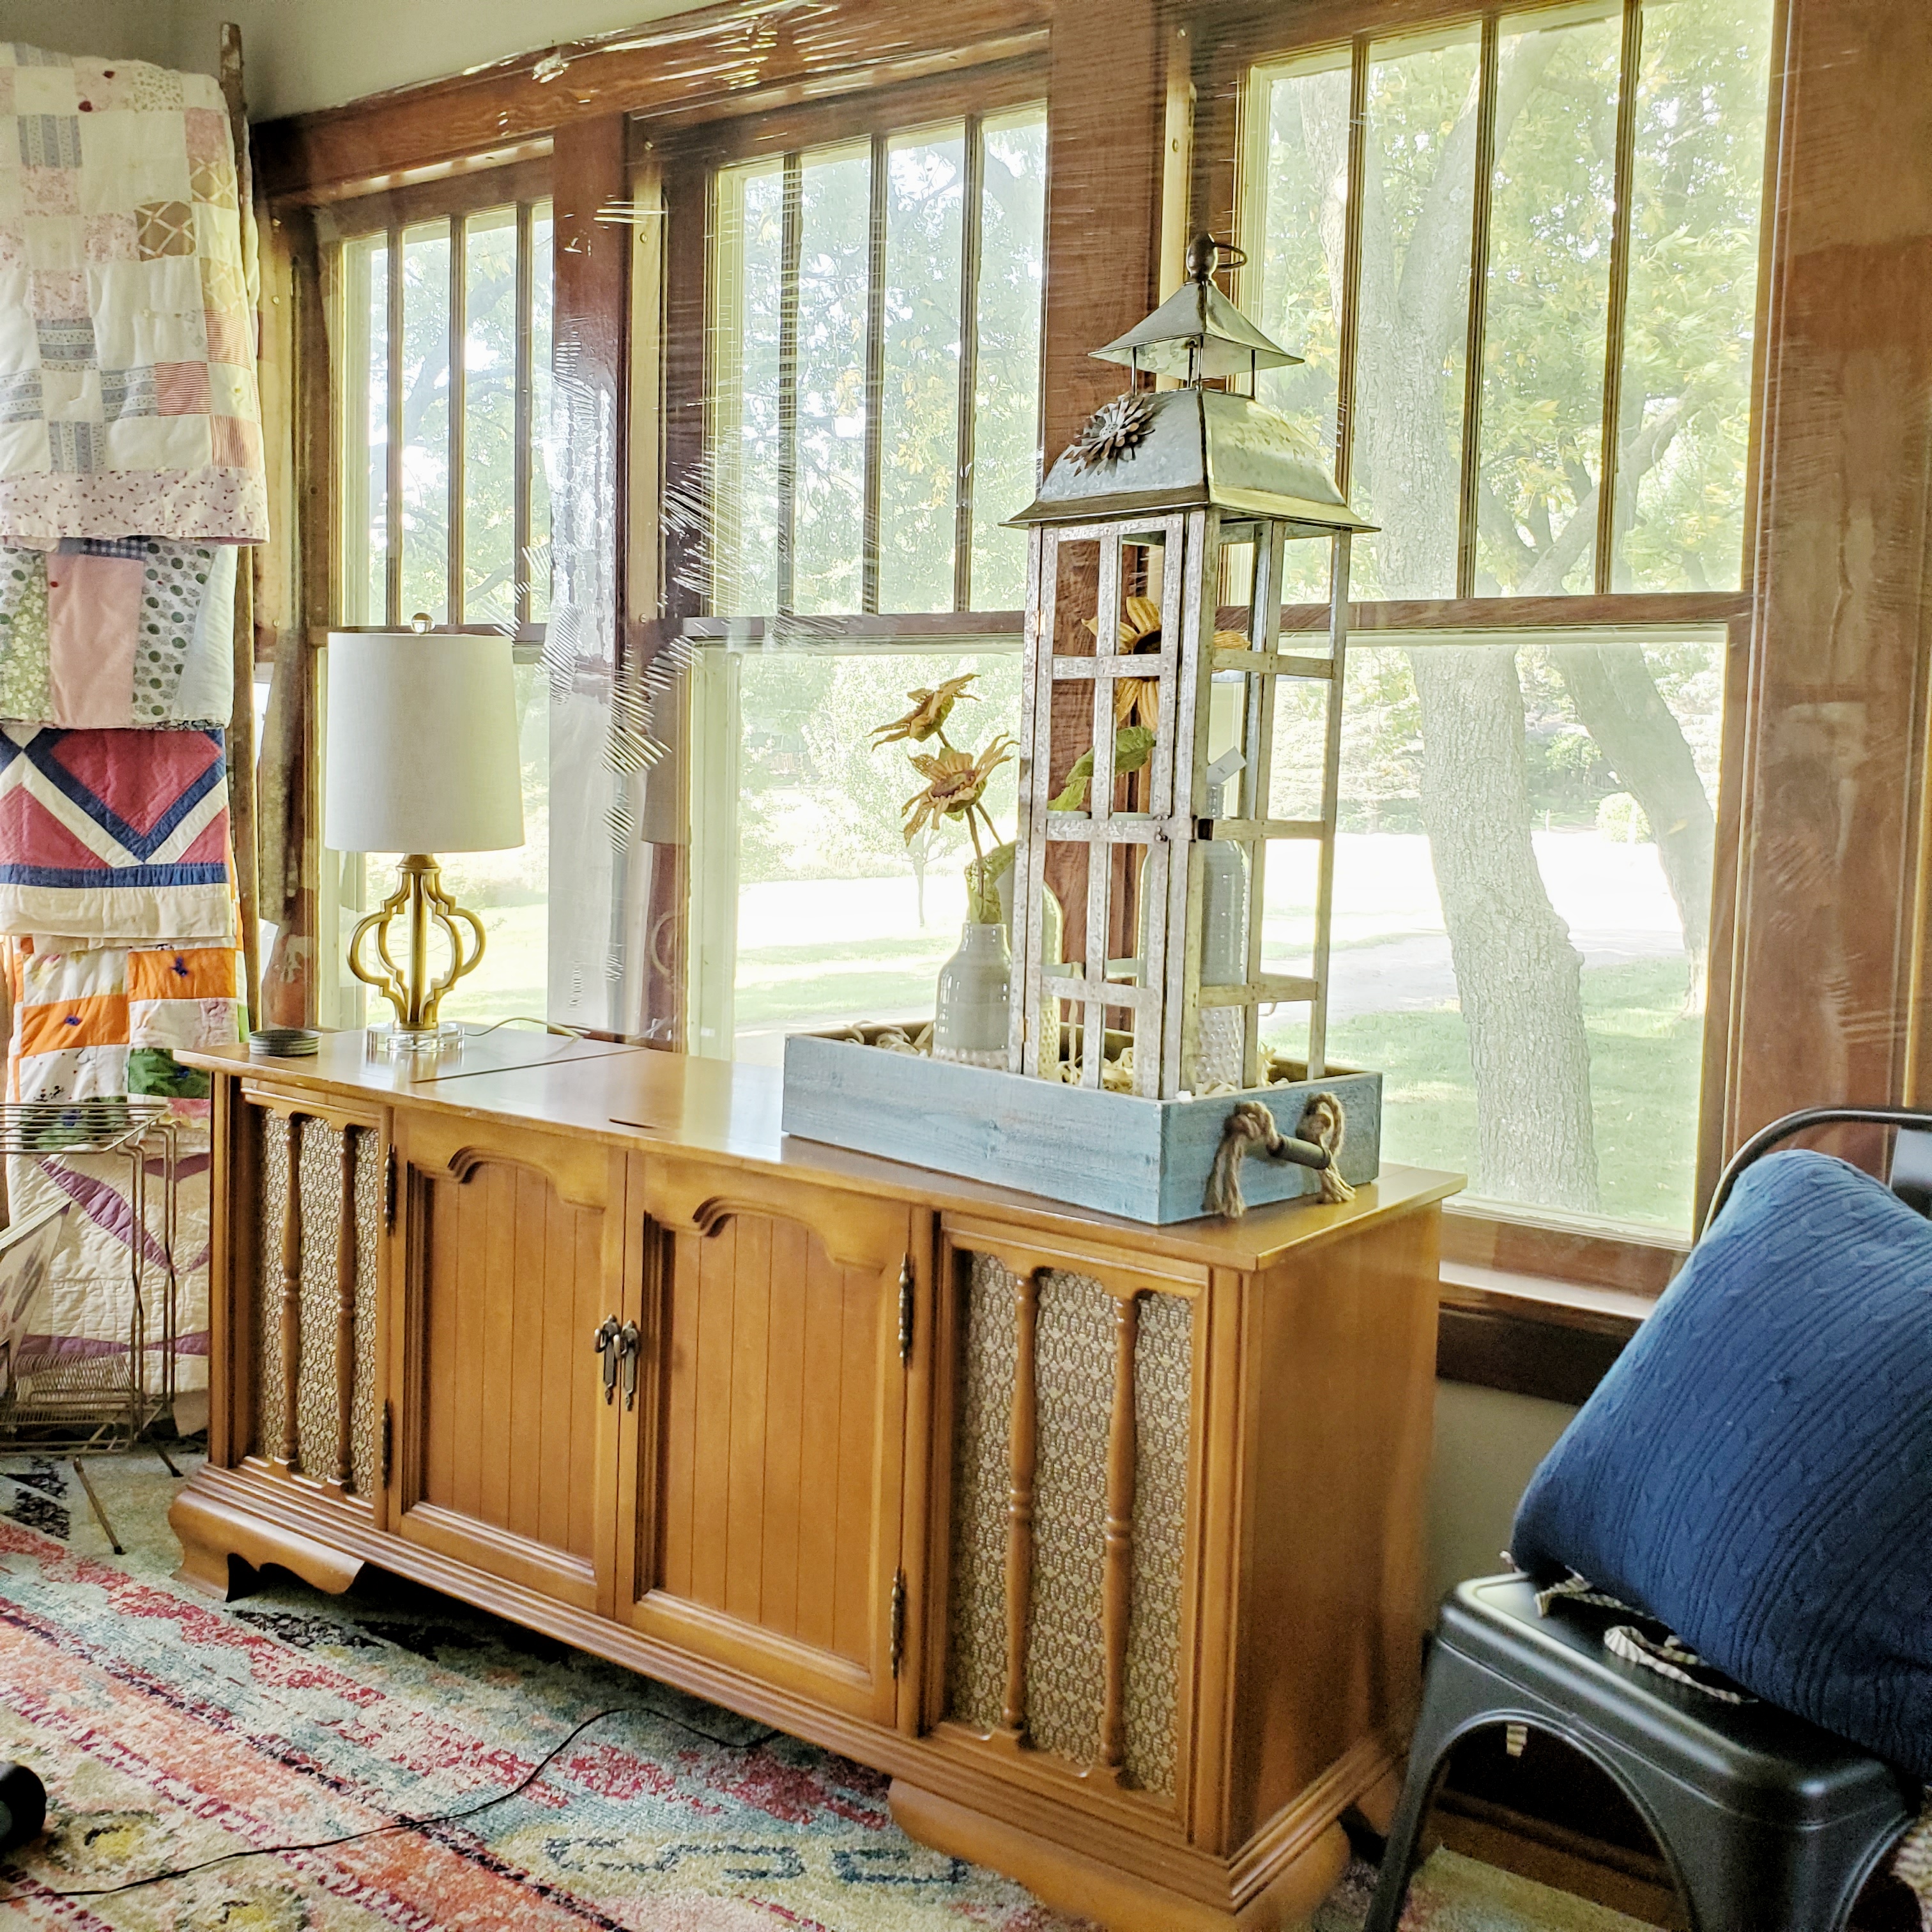 Vintage stereo, barn ladder with quilts and bright boho rug. 